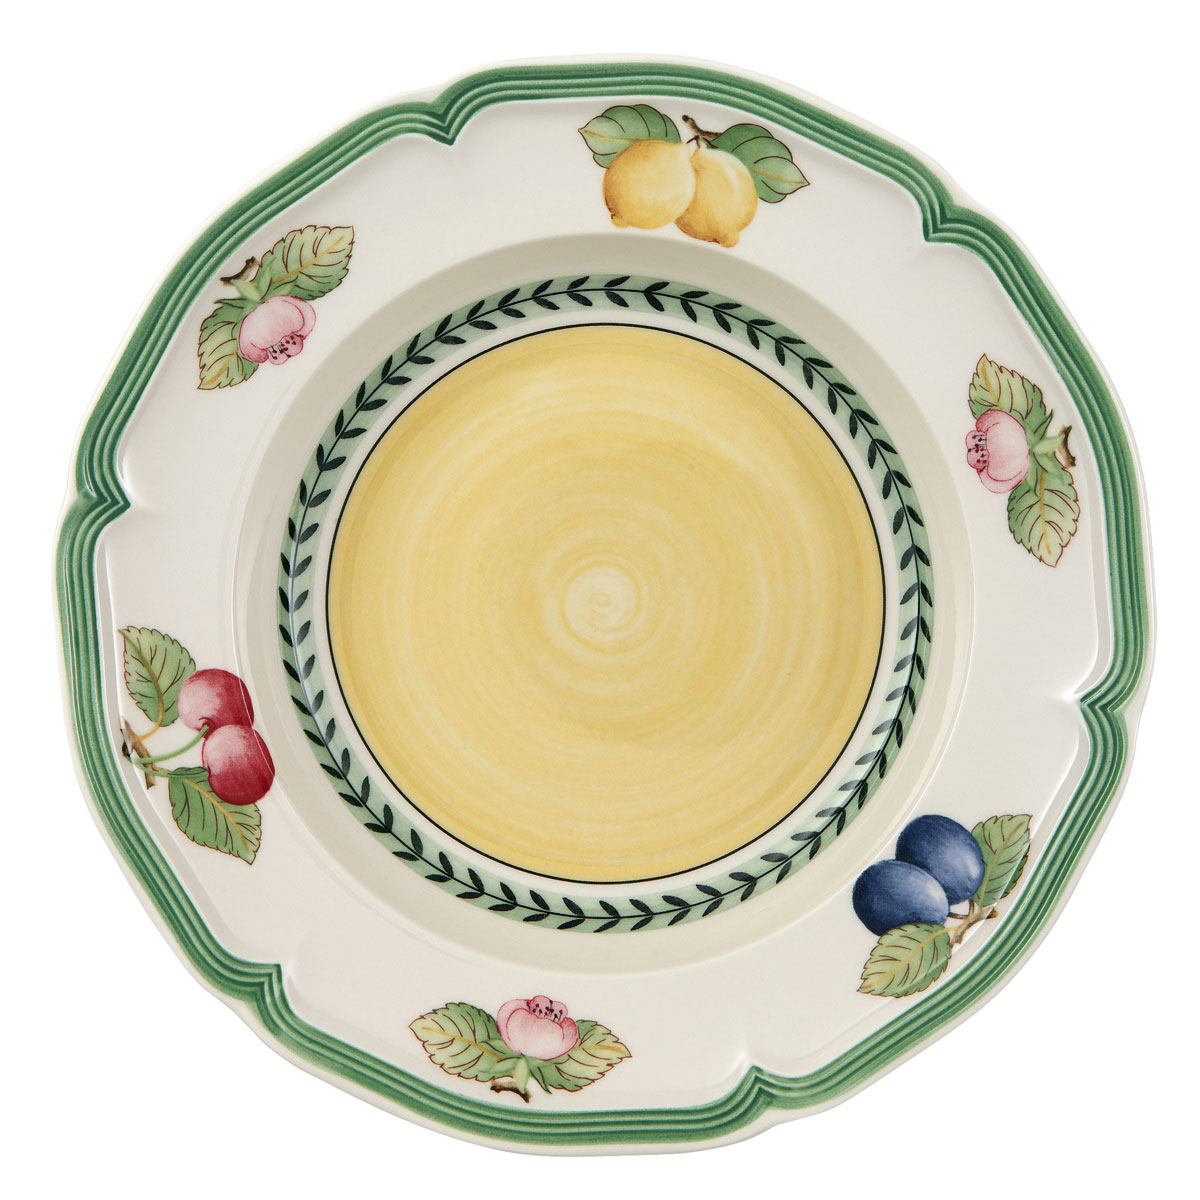 Villeroy and Boch French Garden Fleurence Rim Soup